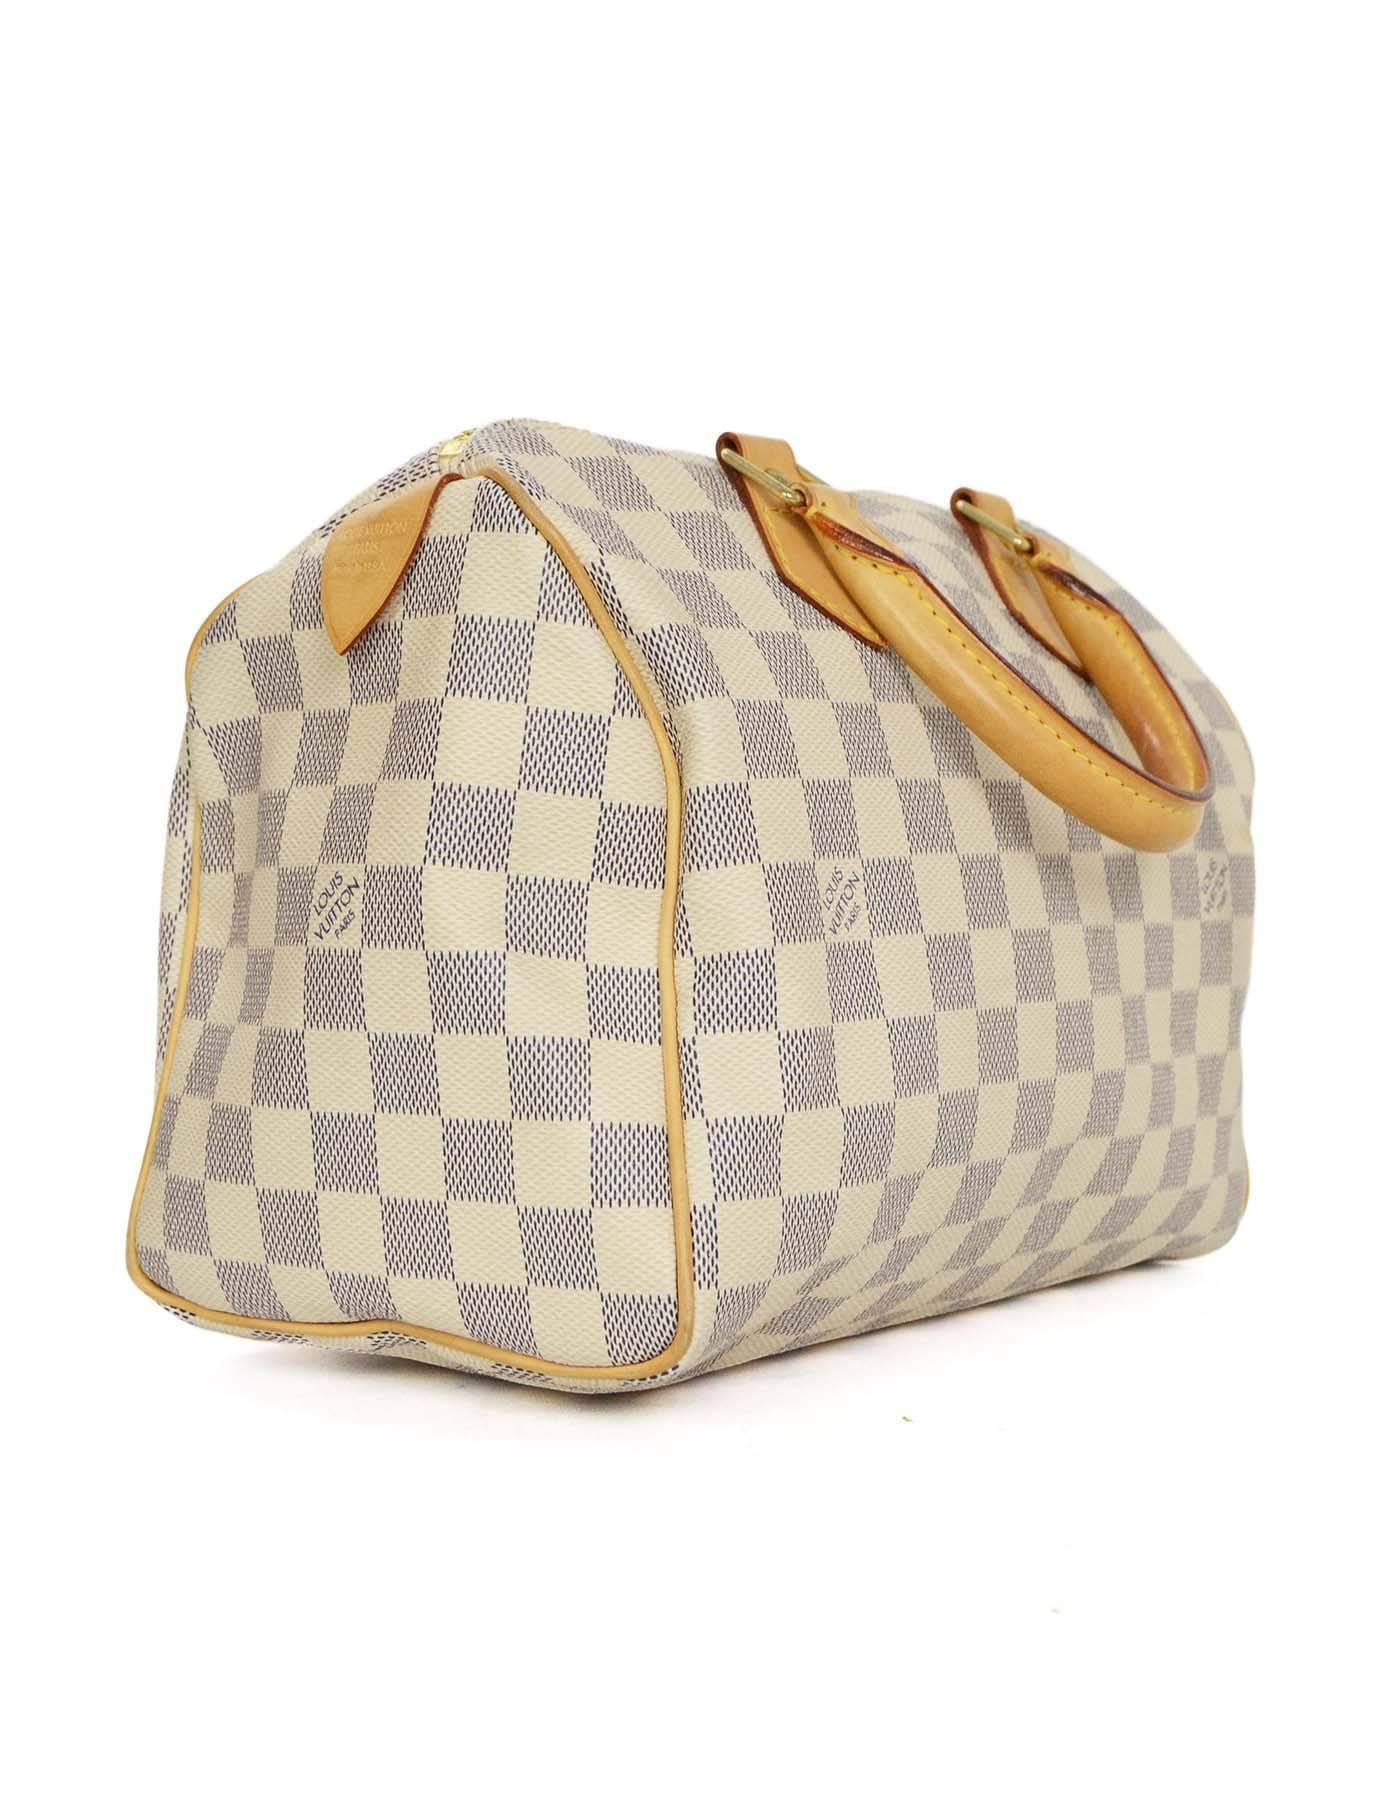 Louis Vuitton Damier Azur Speedy 25 Bag 
Features tan leather wrapped handles and leather trim and piping throughout
Made In: U.S.A
Year of Production: 2007
Color: Cream, navy and tan
Hardware: Goldtone
Materials: Coated canvas and